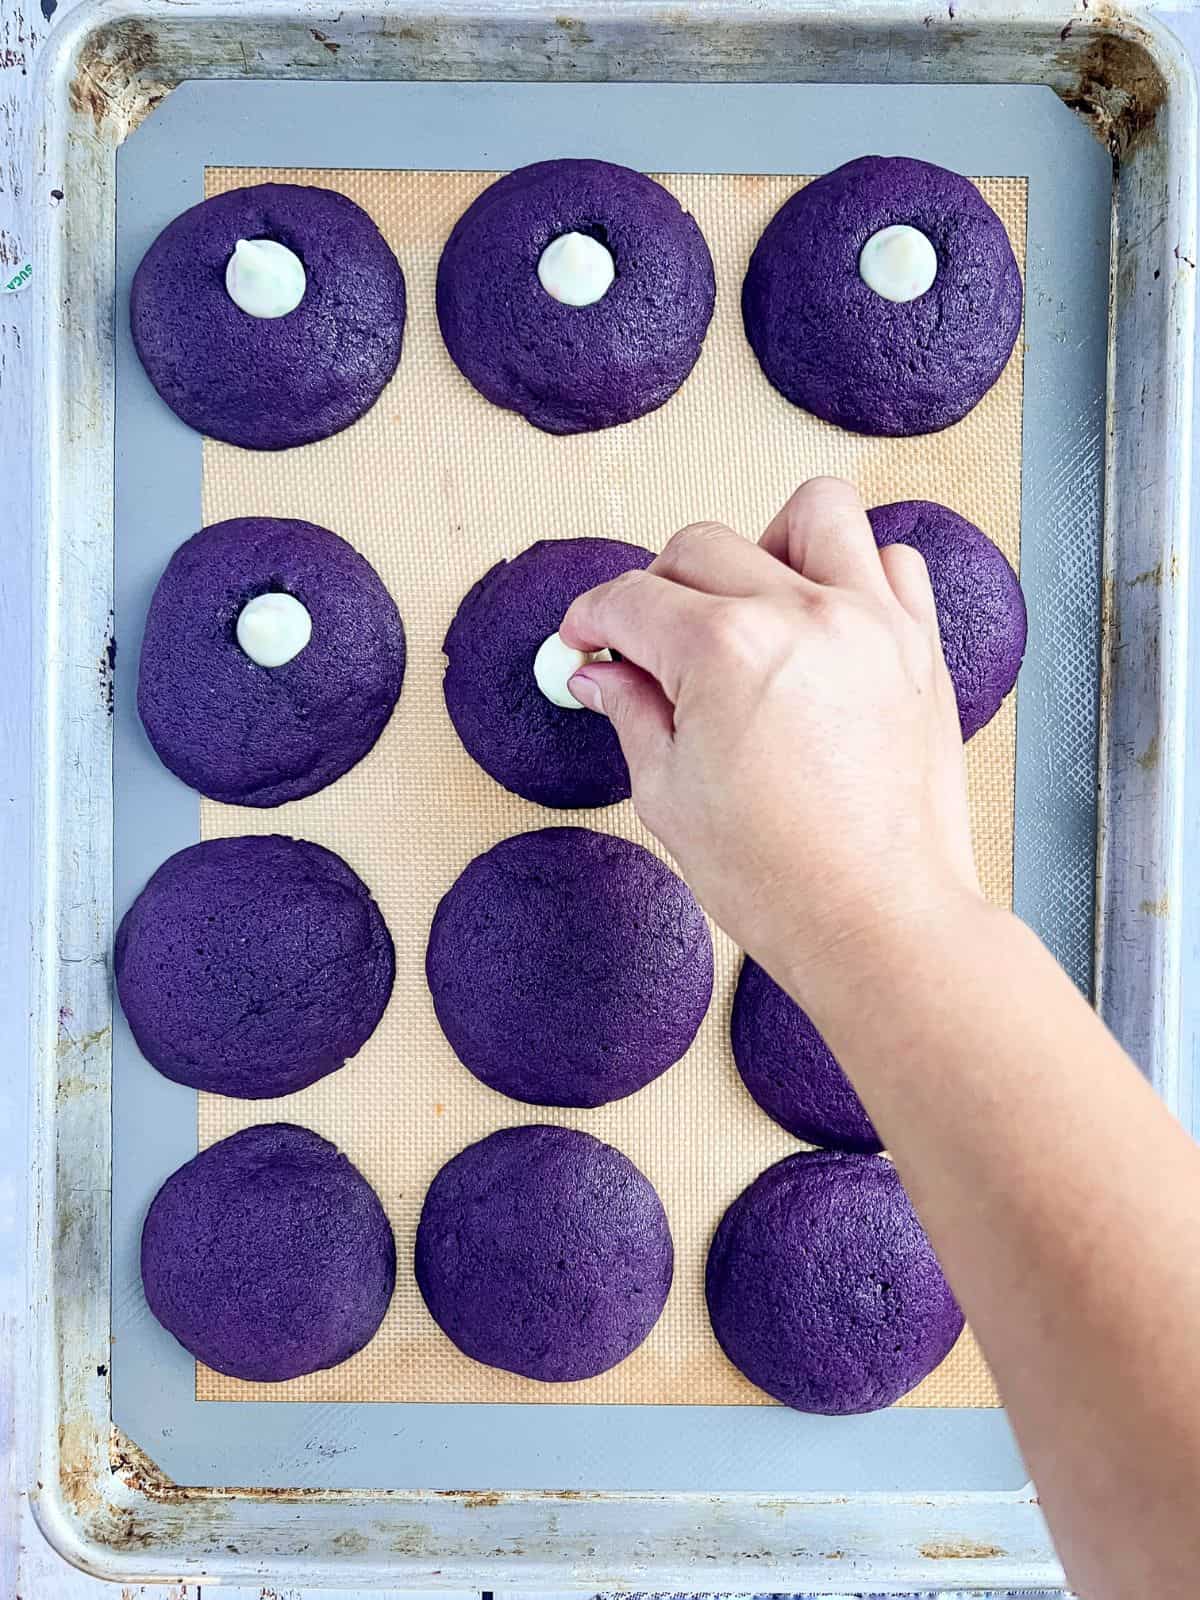 Baked ube cookies topped with milk chocolate.